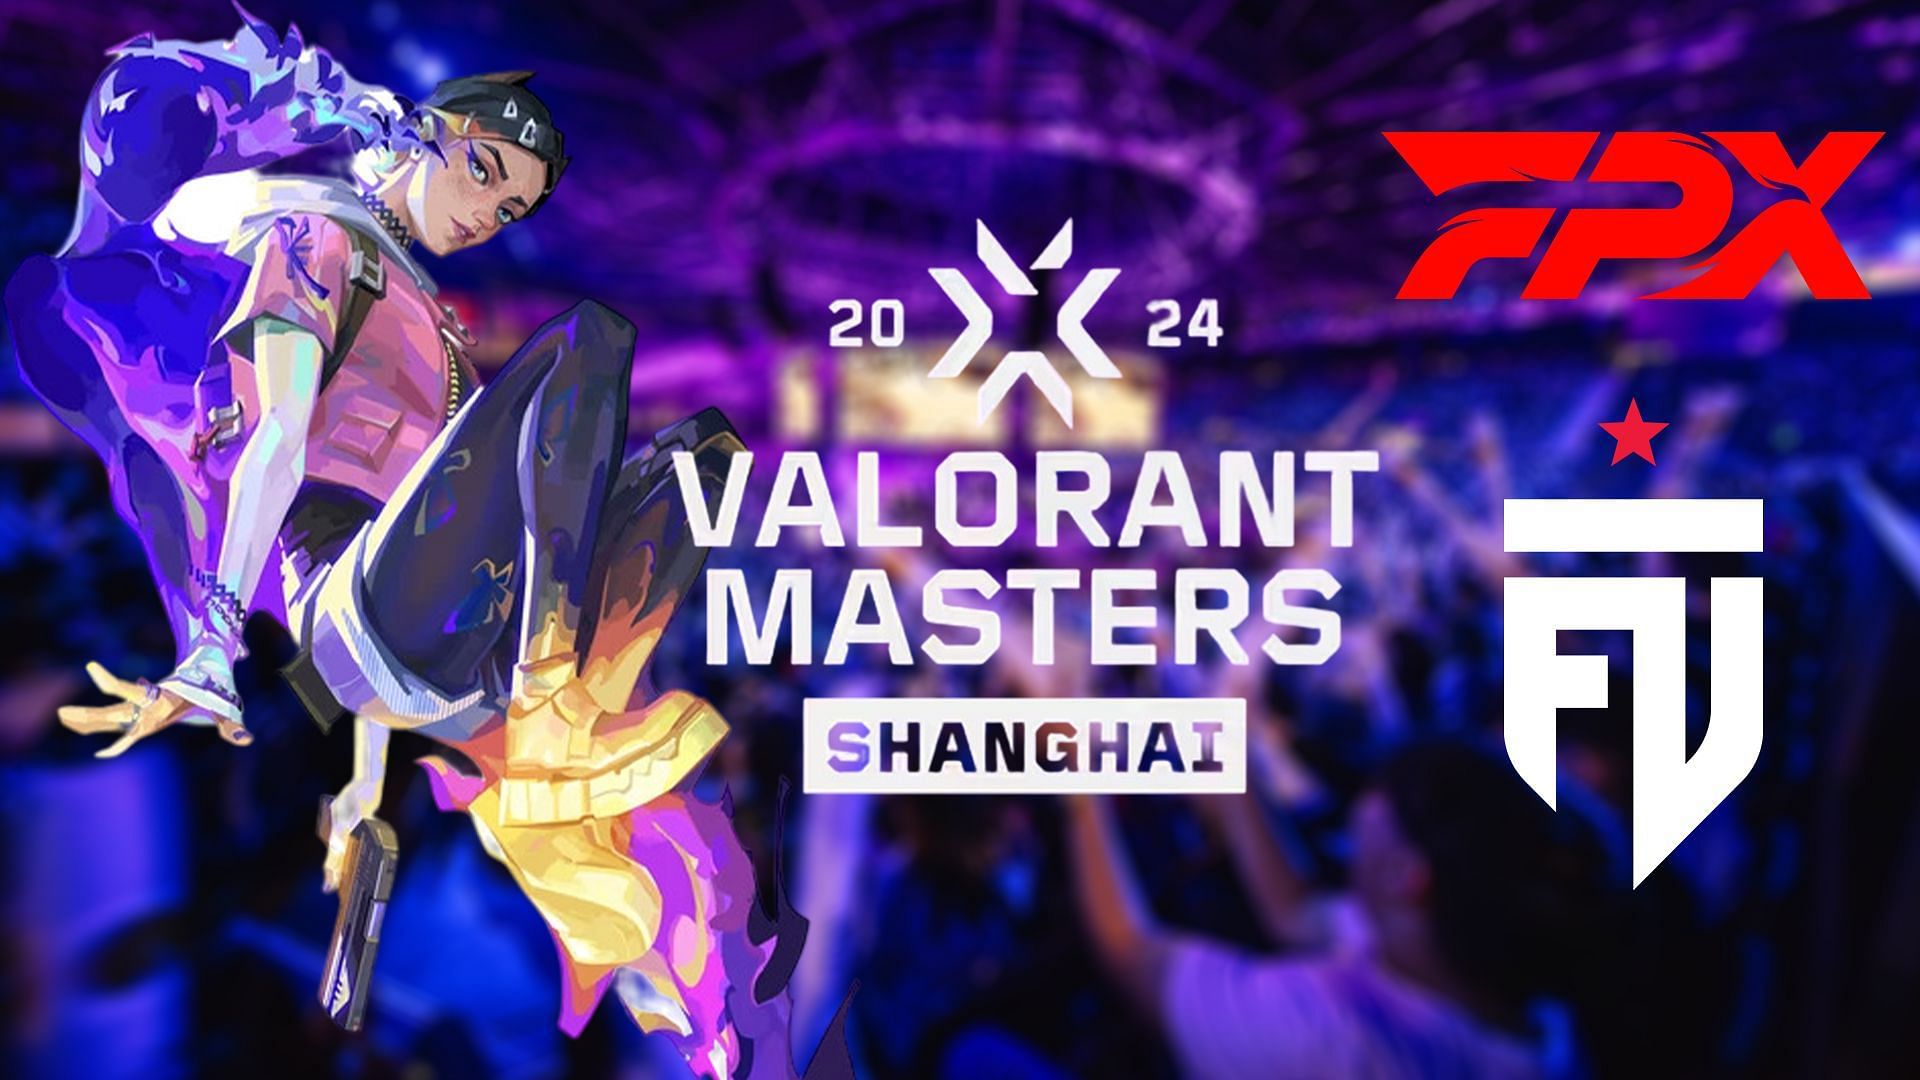 The pro teams that might use Clove in VCT Masters Shanghai (Images via Riot Games, FunPlus Phoenix and FUT Esports))